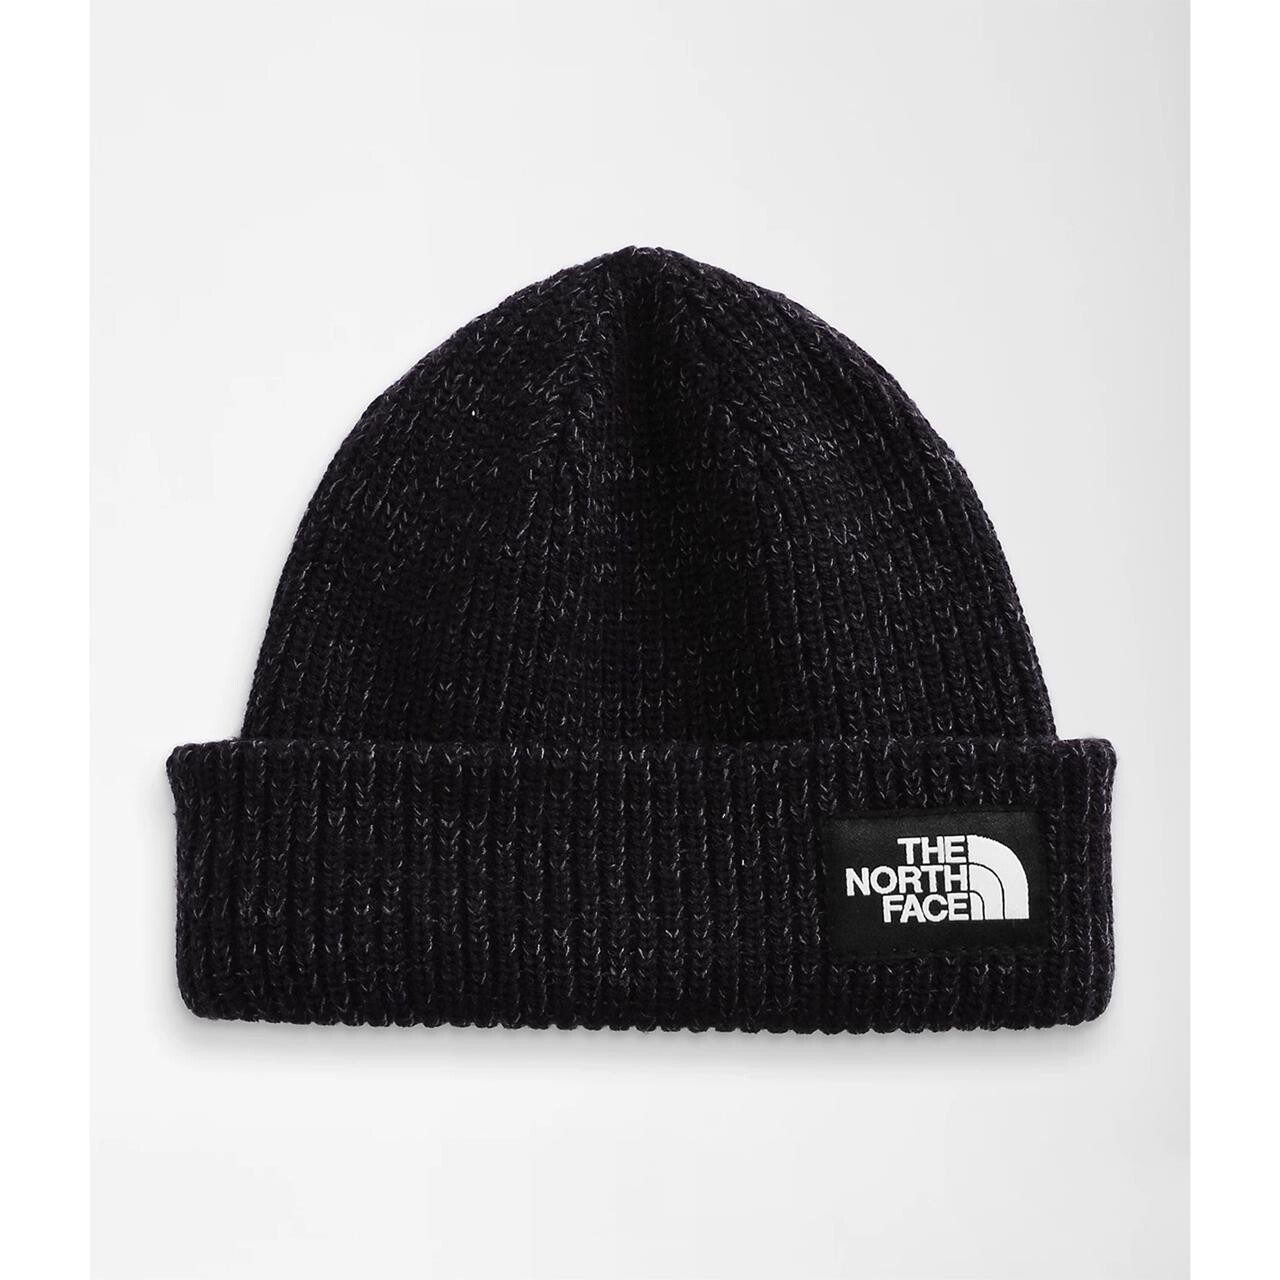 The North Face Salty Dog Beanie (Sort (TNF BLACK) One size)